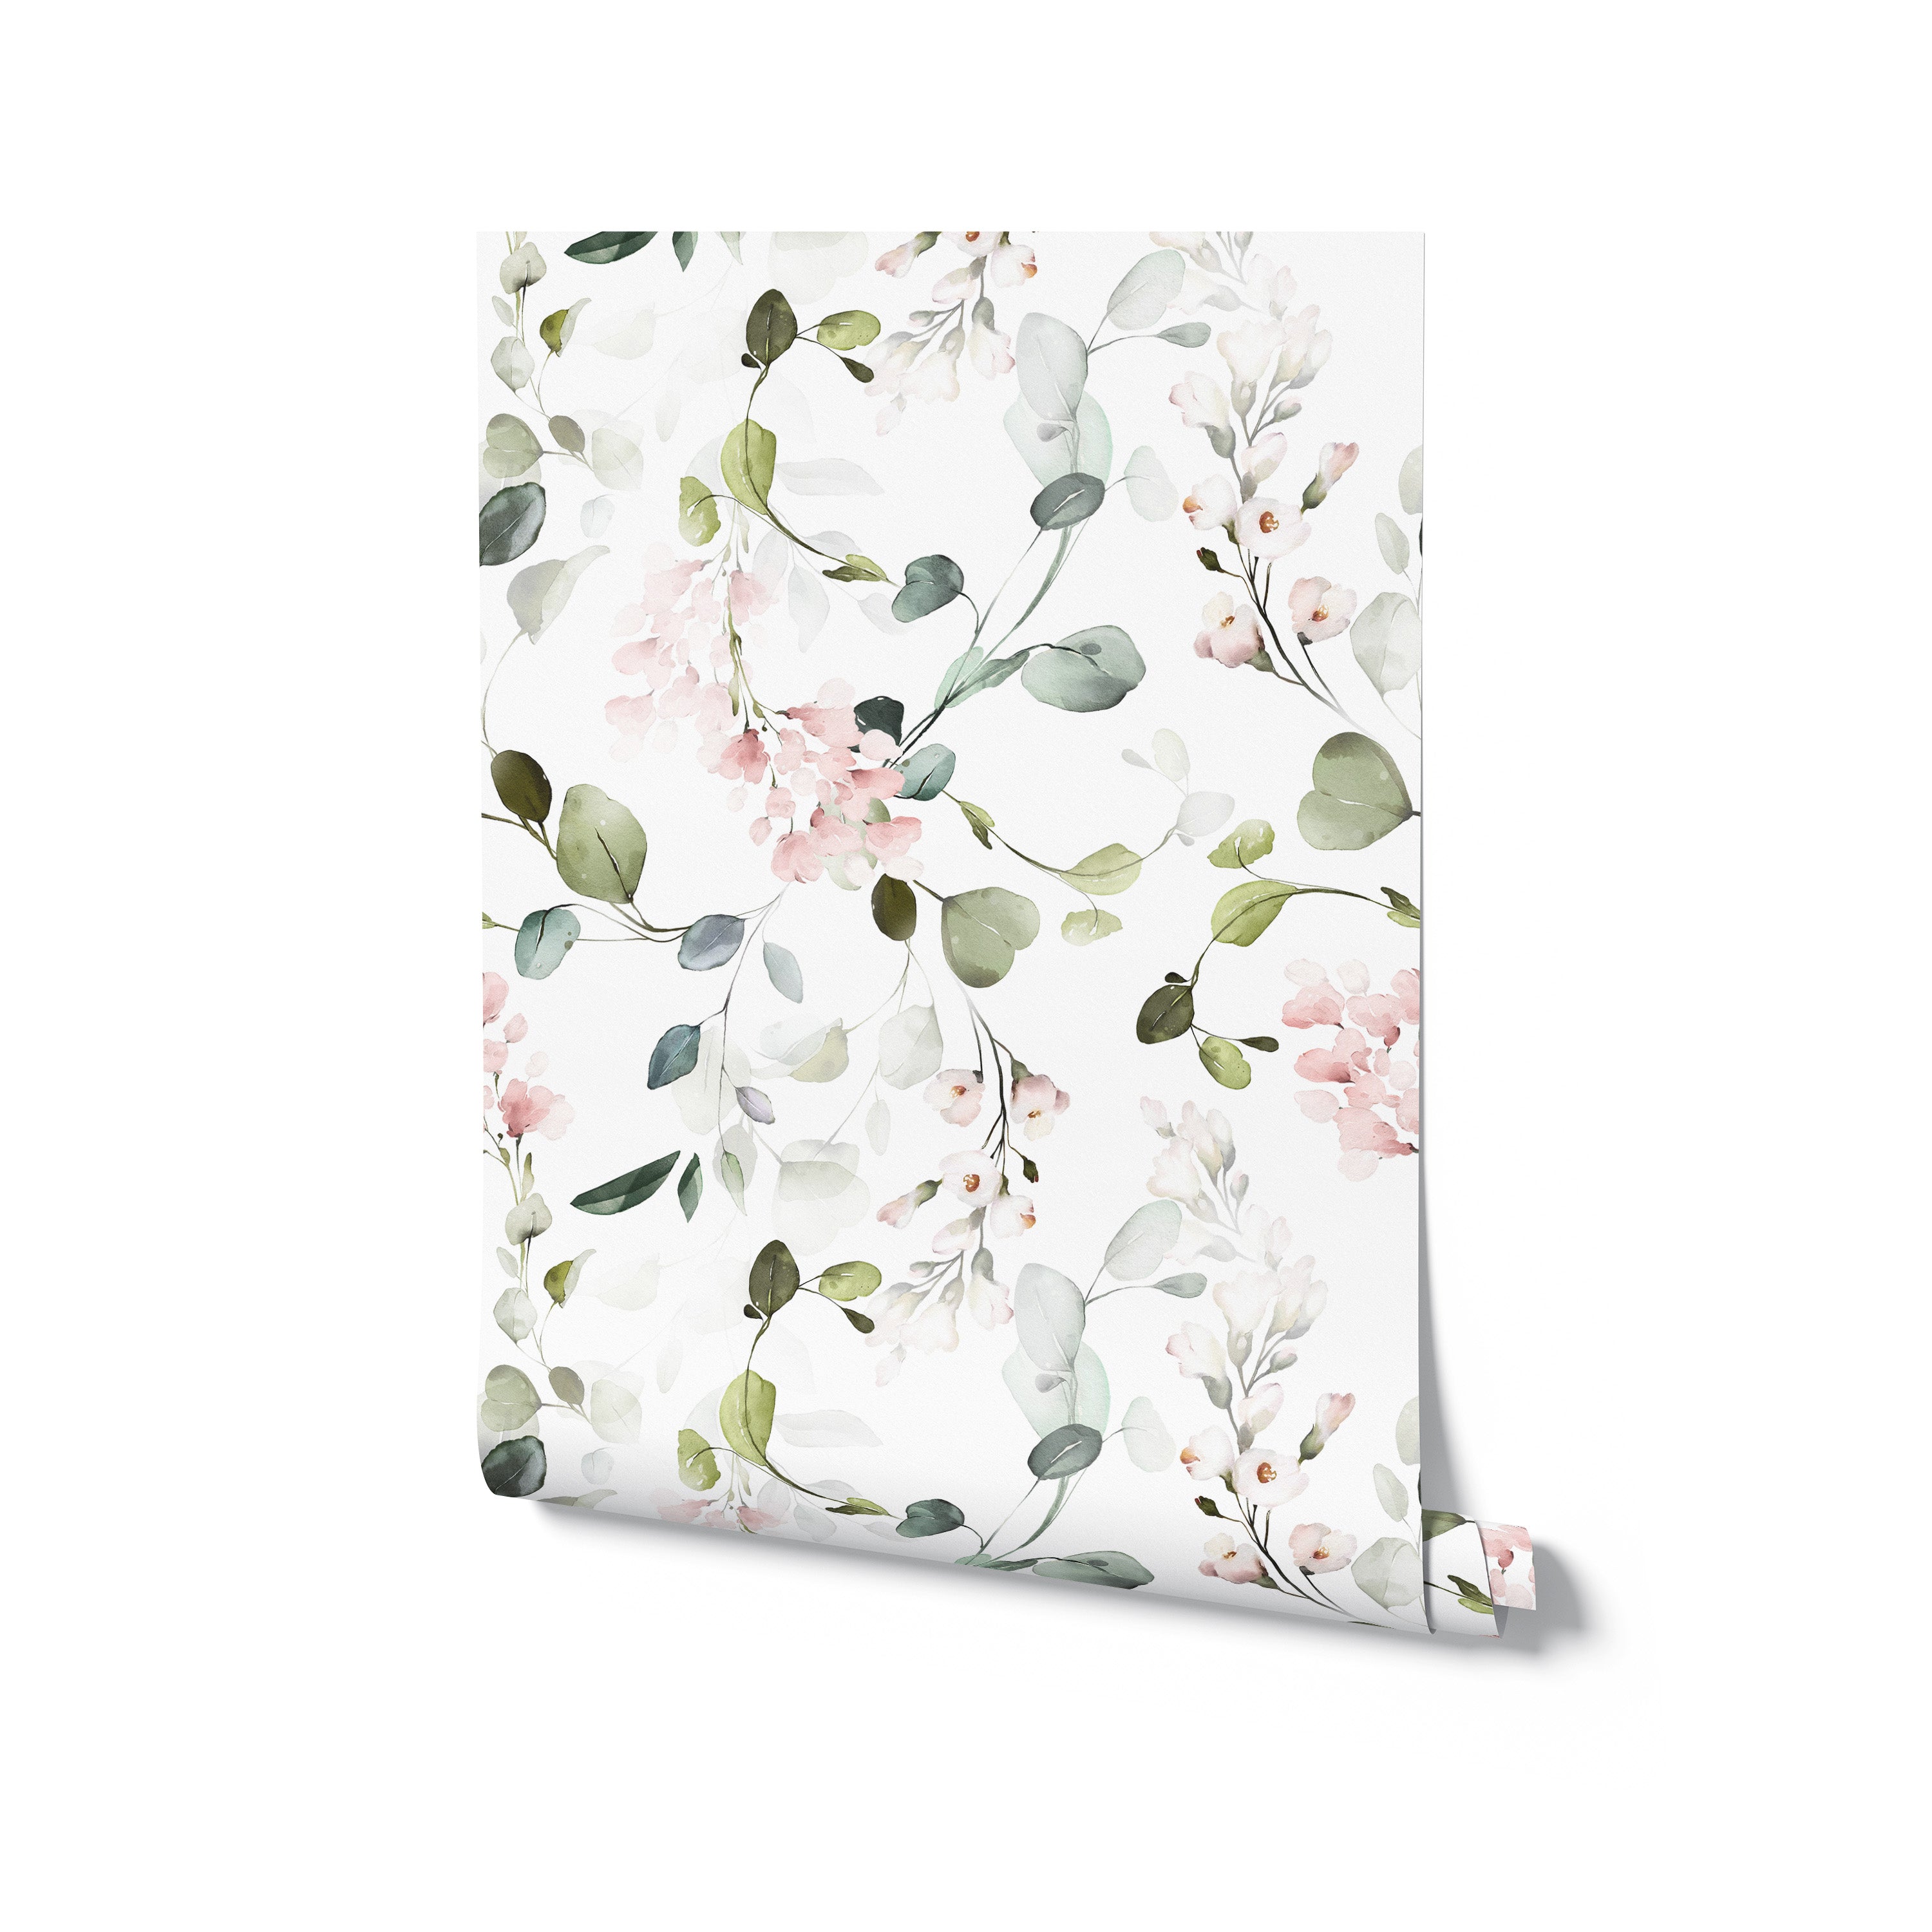 A close-up view of the Pink Floral & Herbs Wallpaper roll, displaying the soft watercolor blooms and greenery on a white background. The wallpaper captures the essence of a tranquil garden, ideal for infusing spaces with floral charm and a sense of peace.